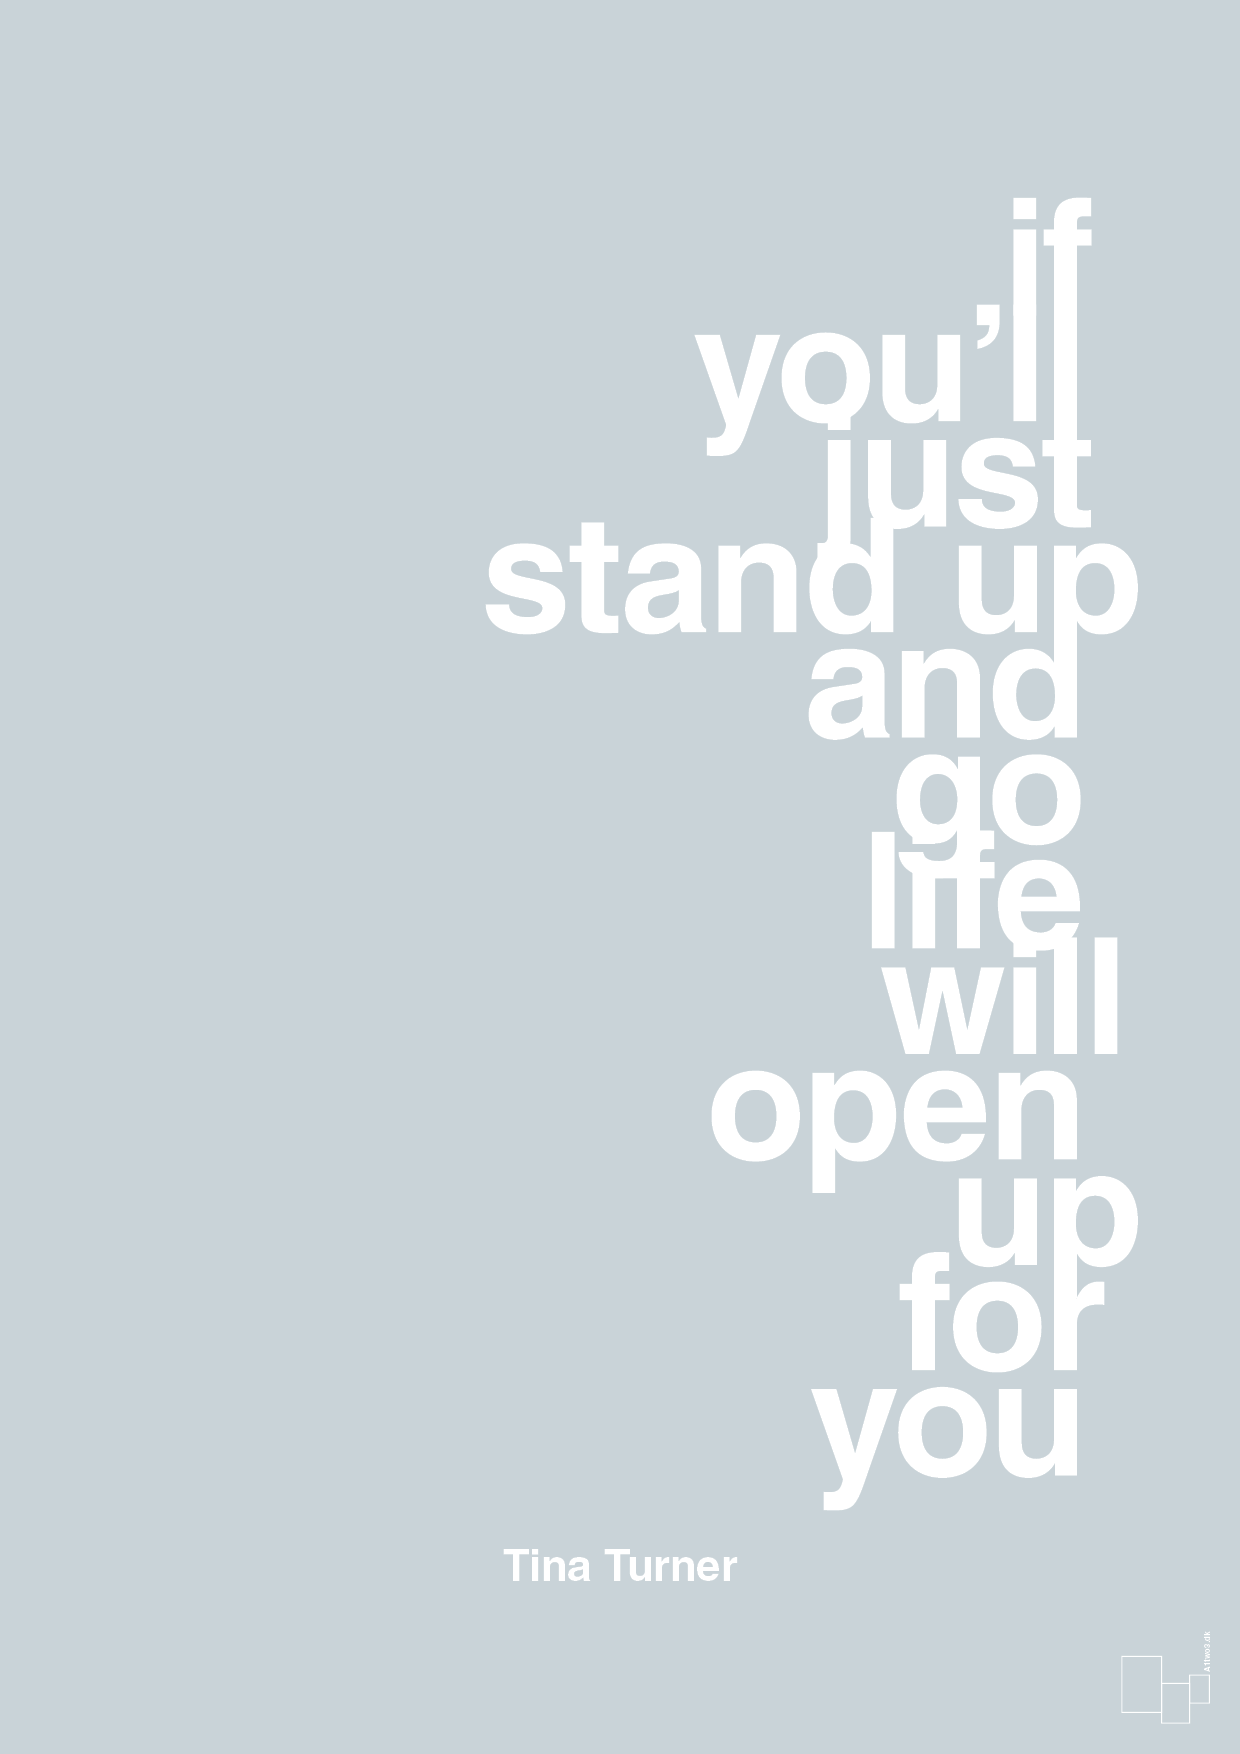 if you’ll just stand up and go life will open up for you - Plakat med Citater i Light Drizzle